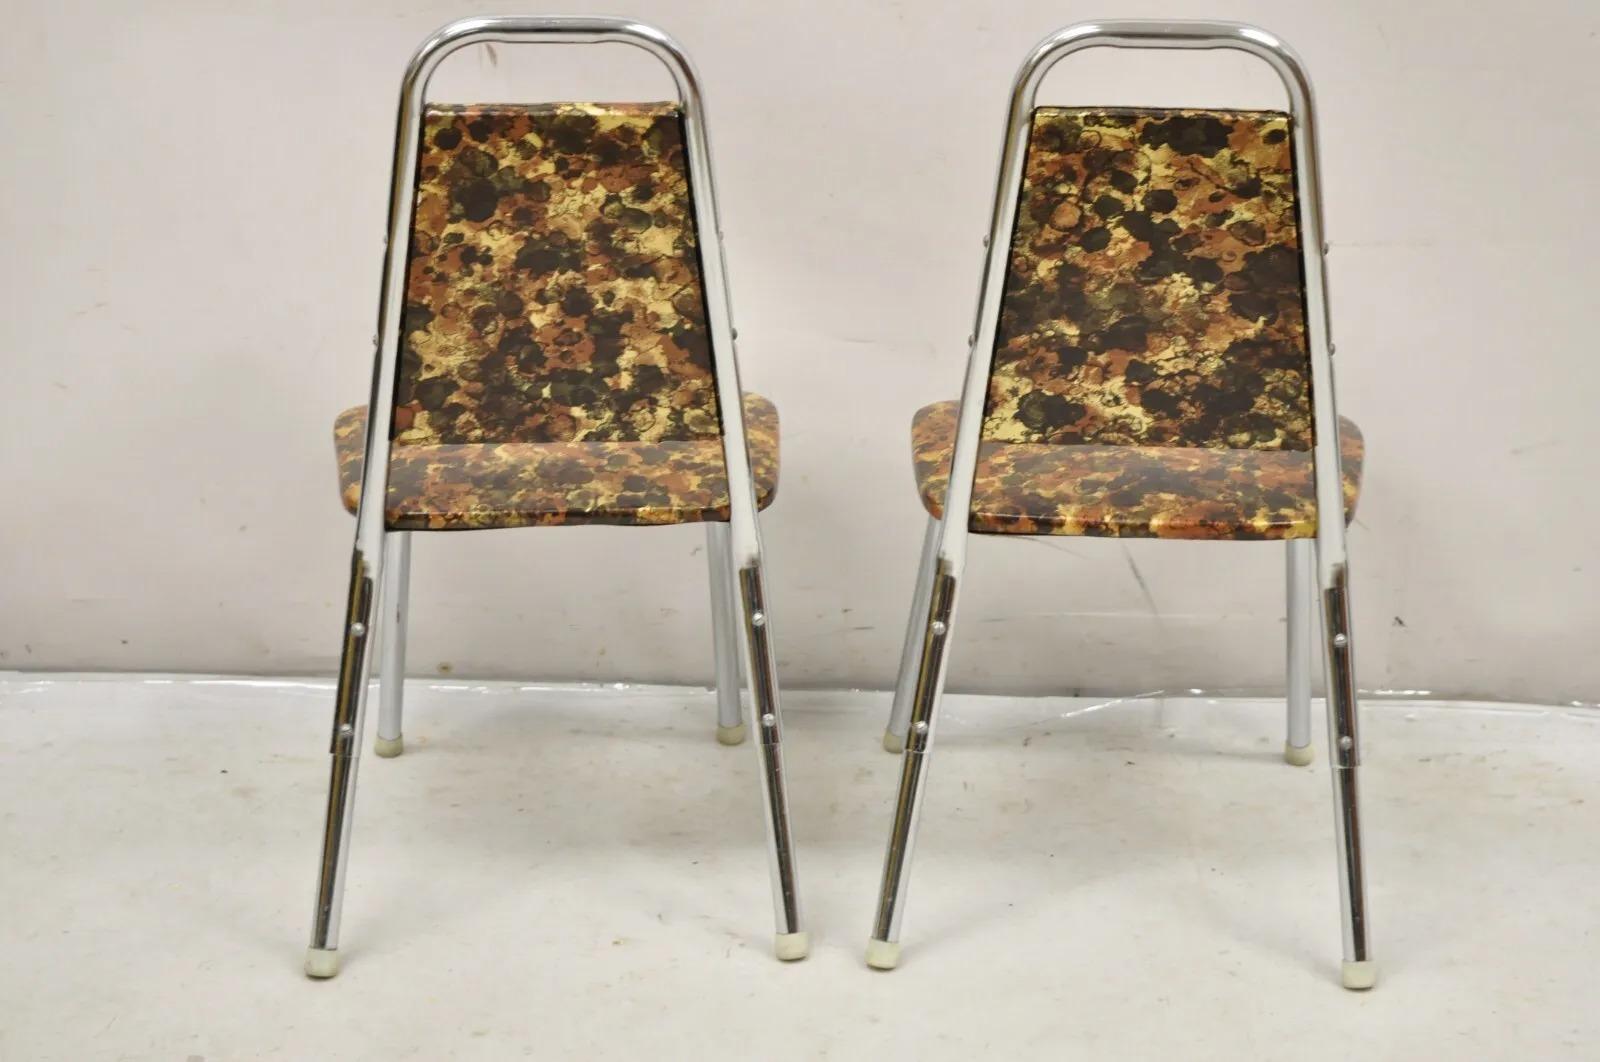 Vintage Children's Small Mid Century Tubular Metal Side Chairs - A Pair For Sale 4